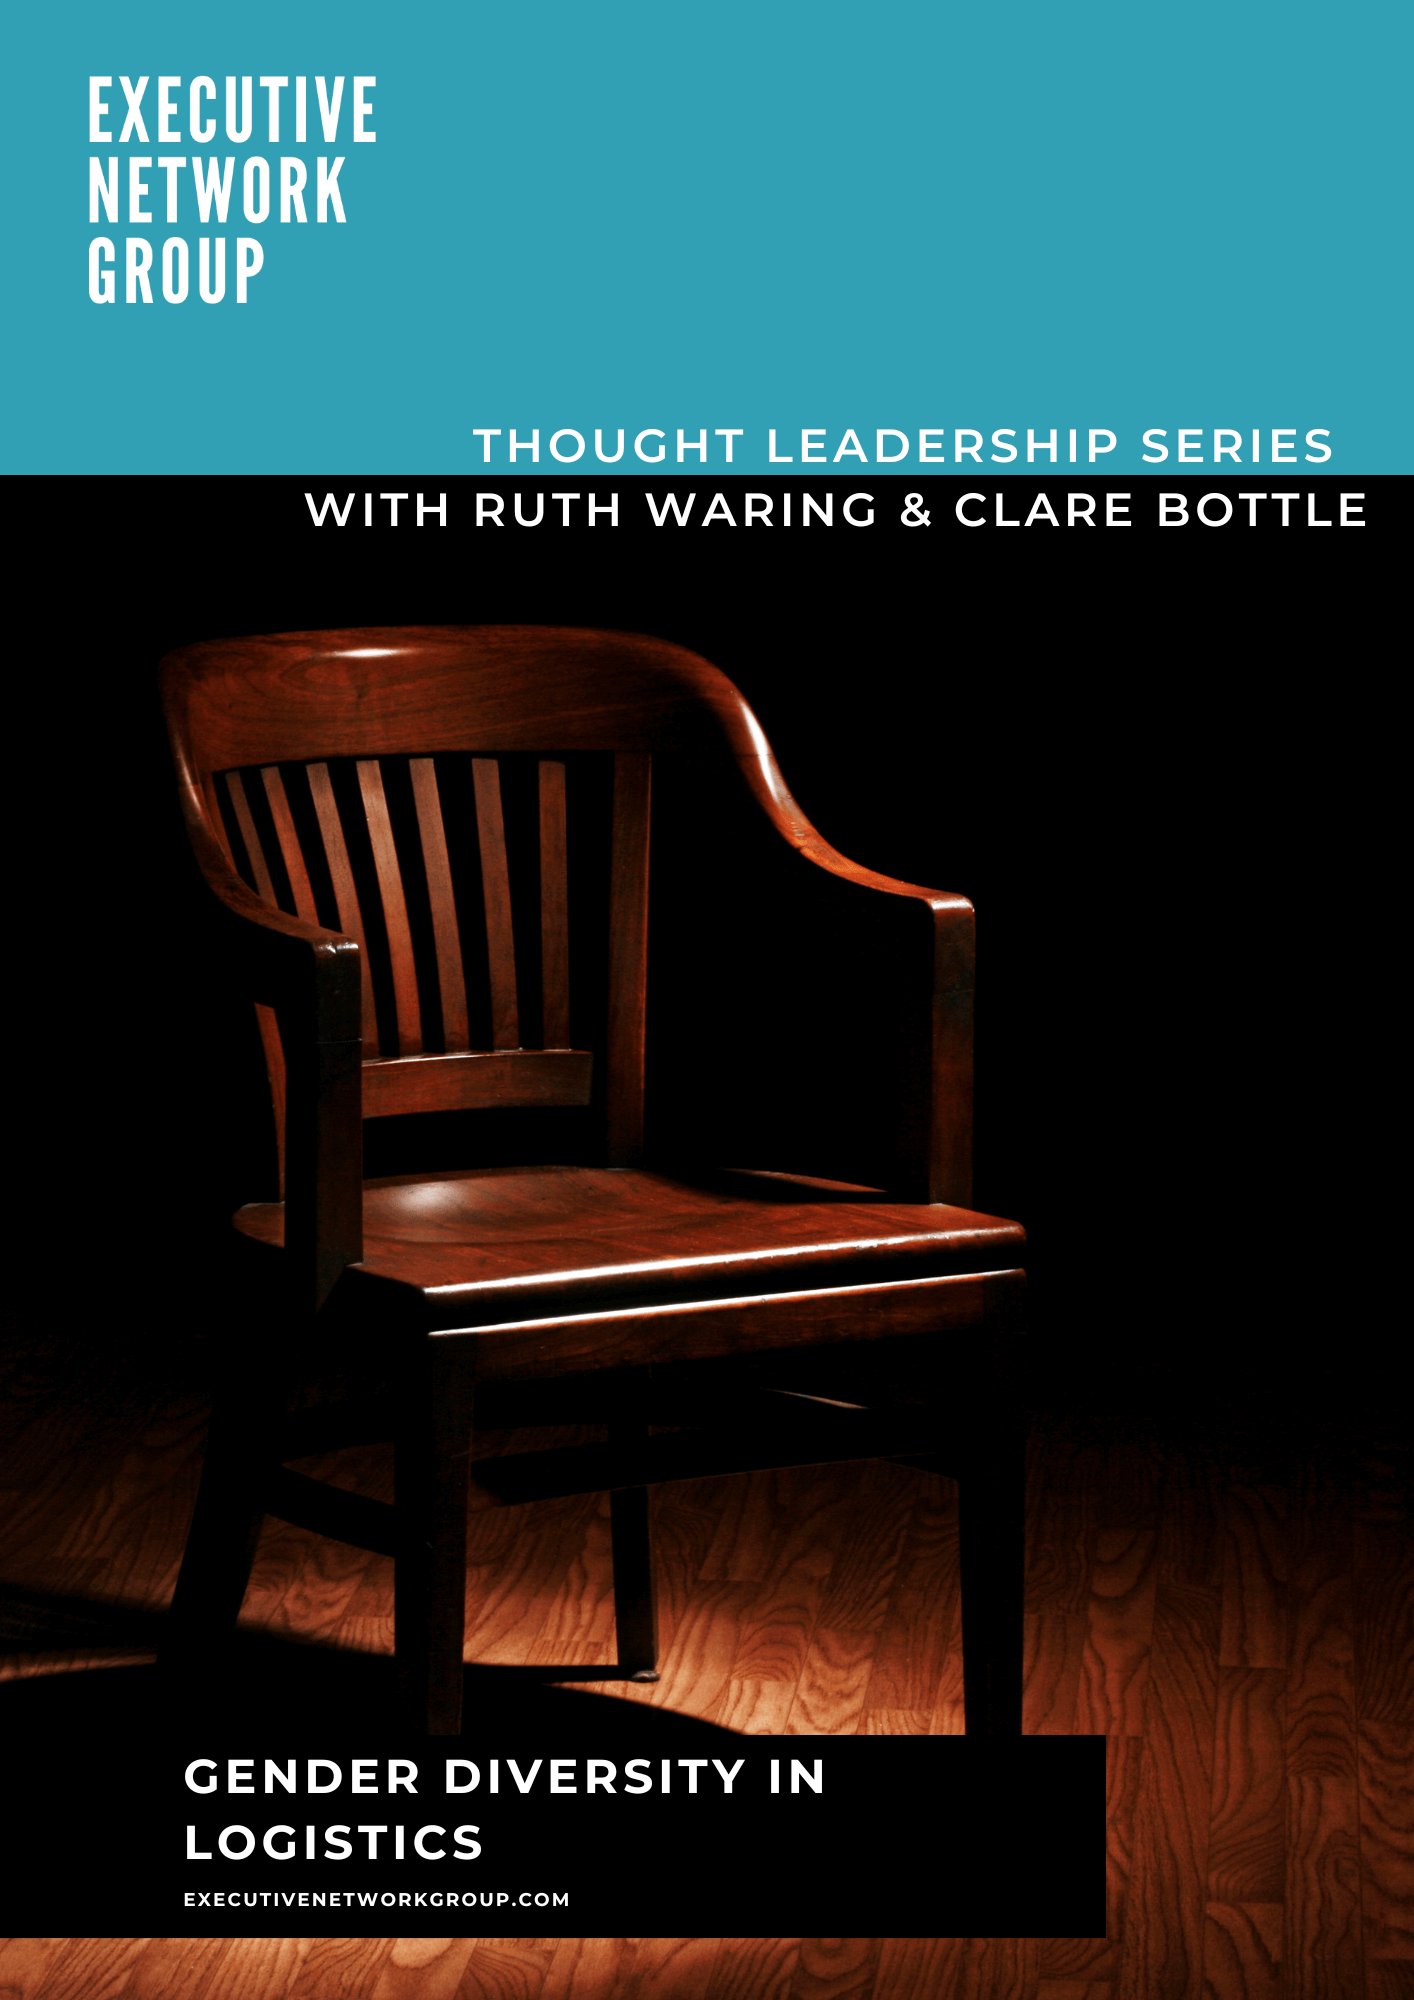 Ruth Waring & Clare Bottle - Thought Leadership